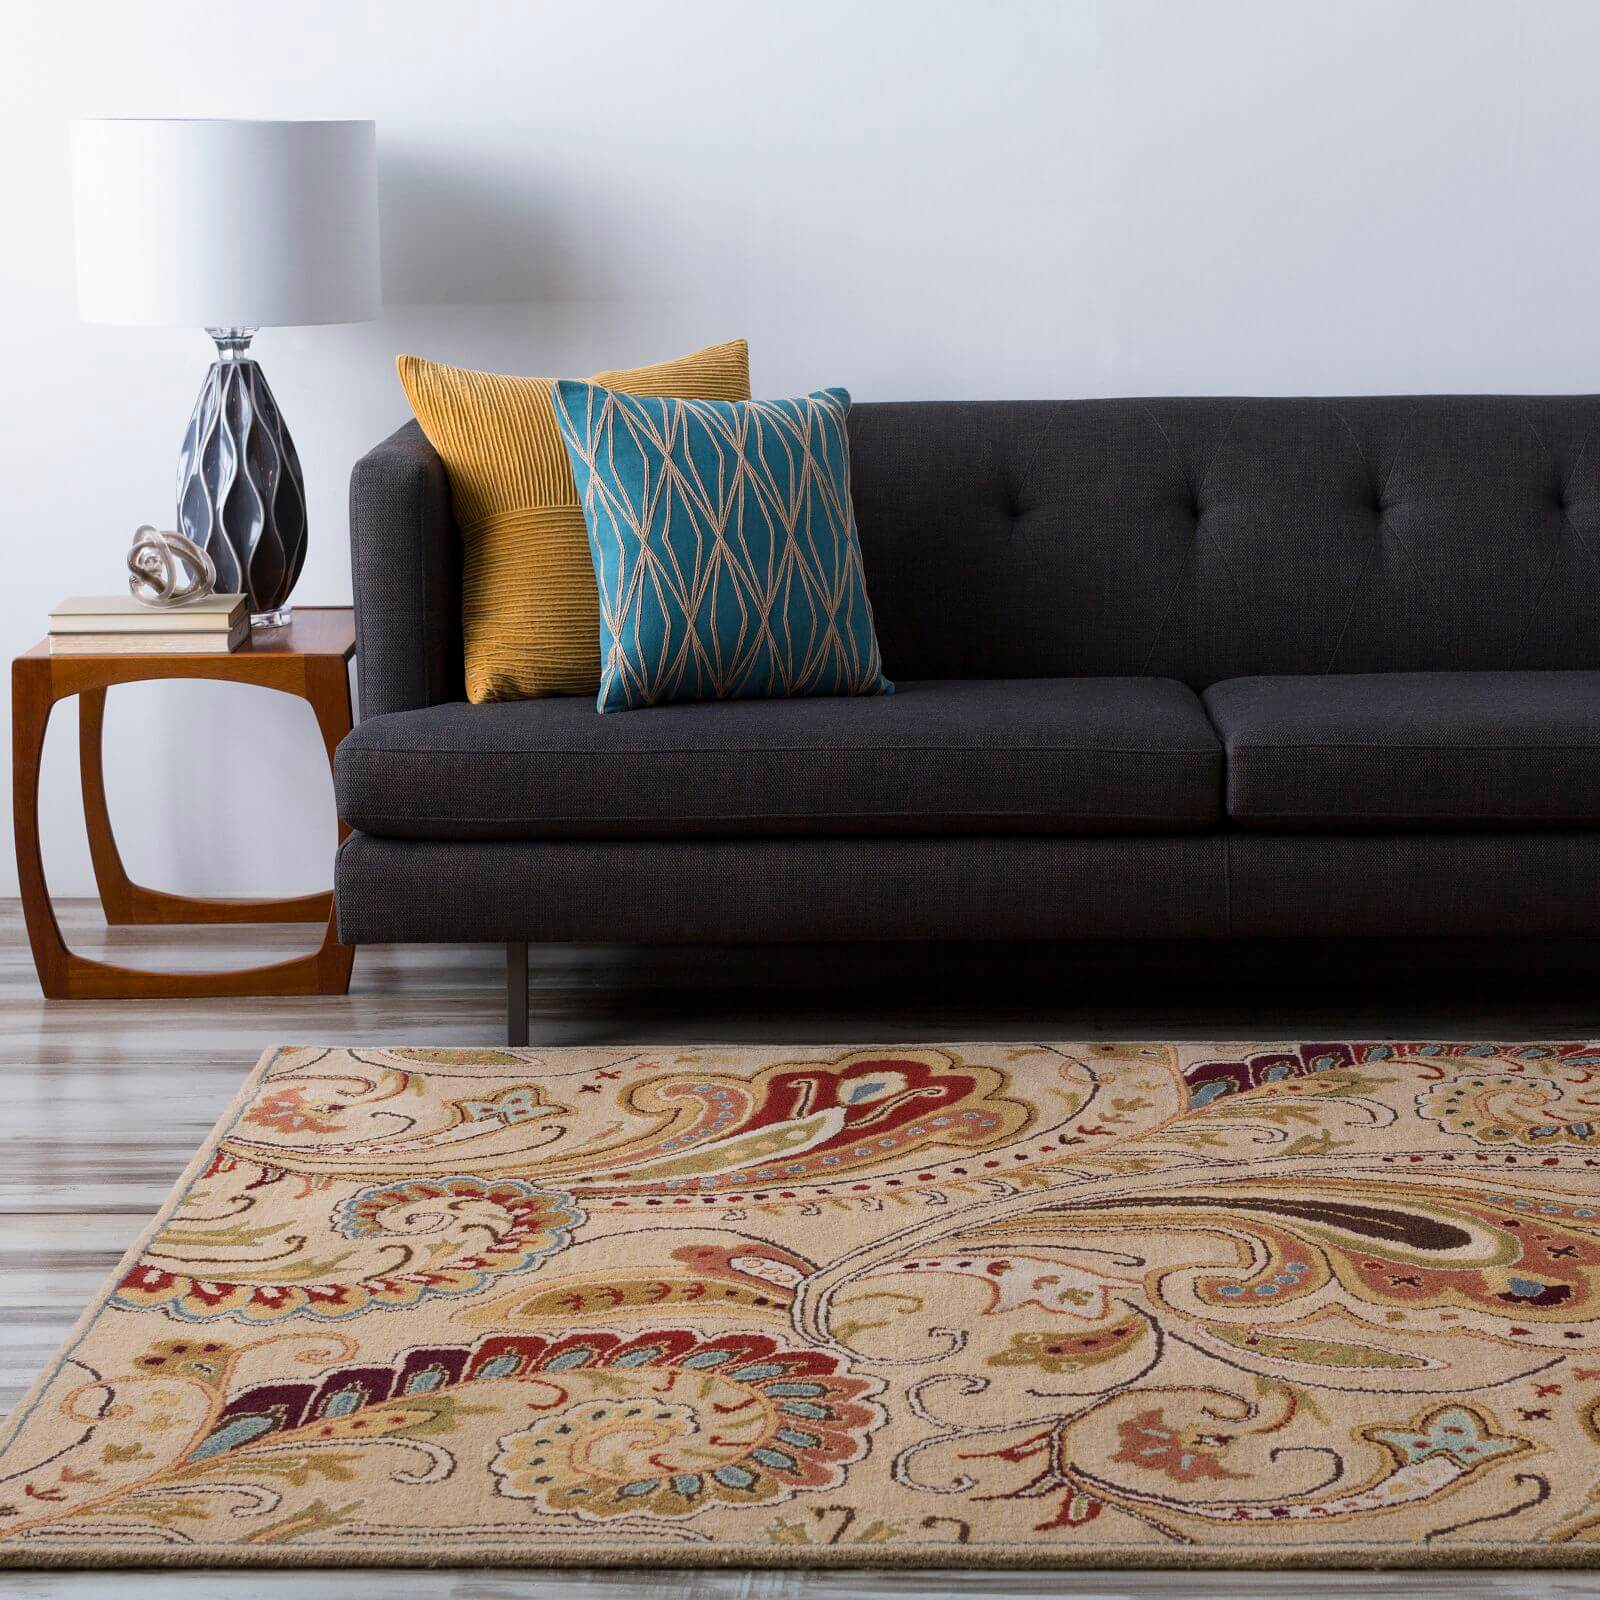 Area rug for living room | Nampa Floors